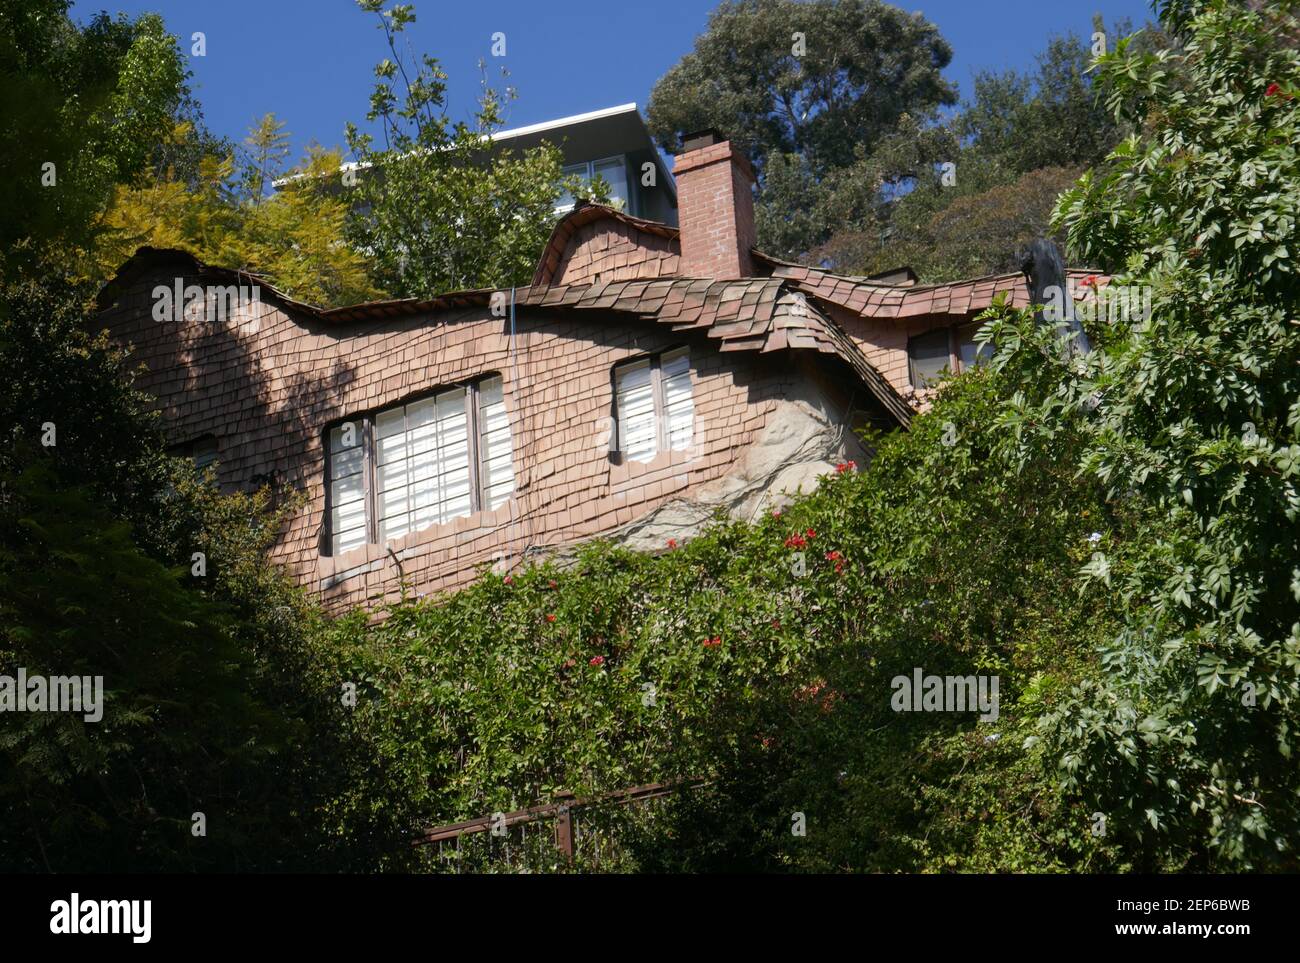 Laurel canyon blvd hi-res stock photography and images - Alamy